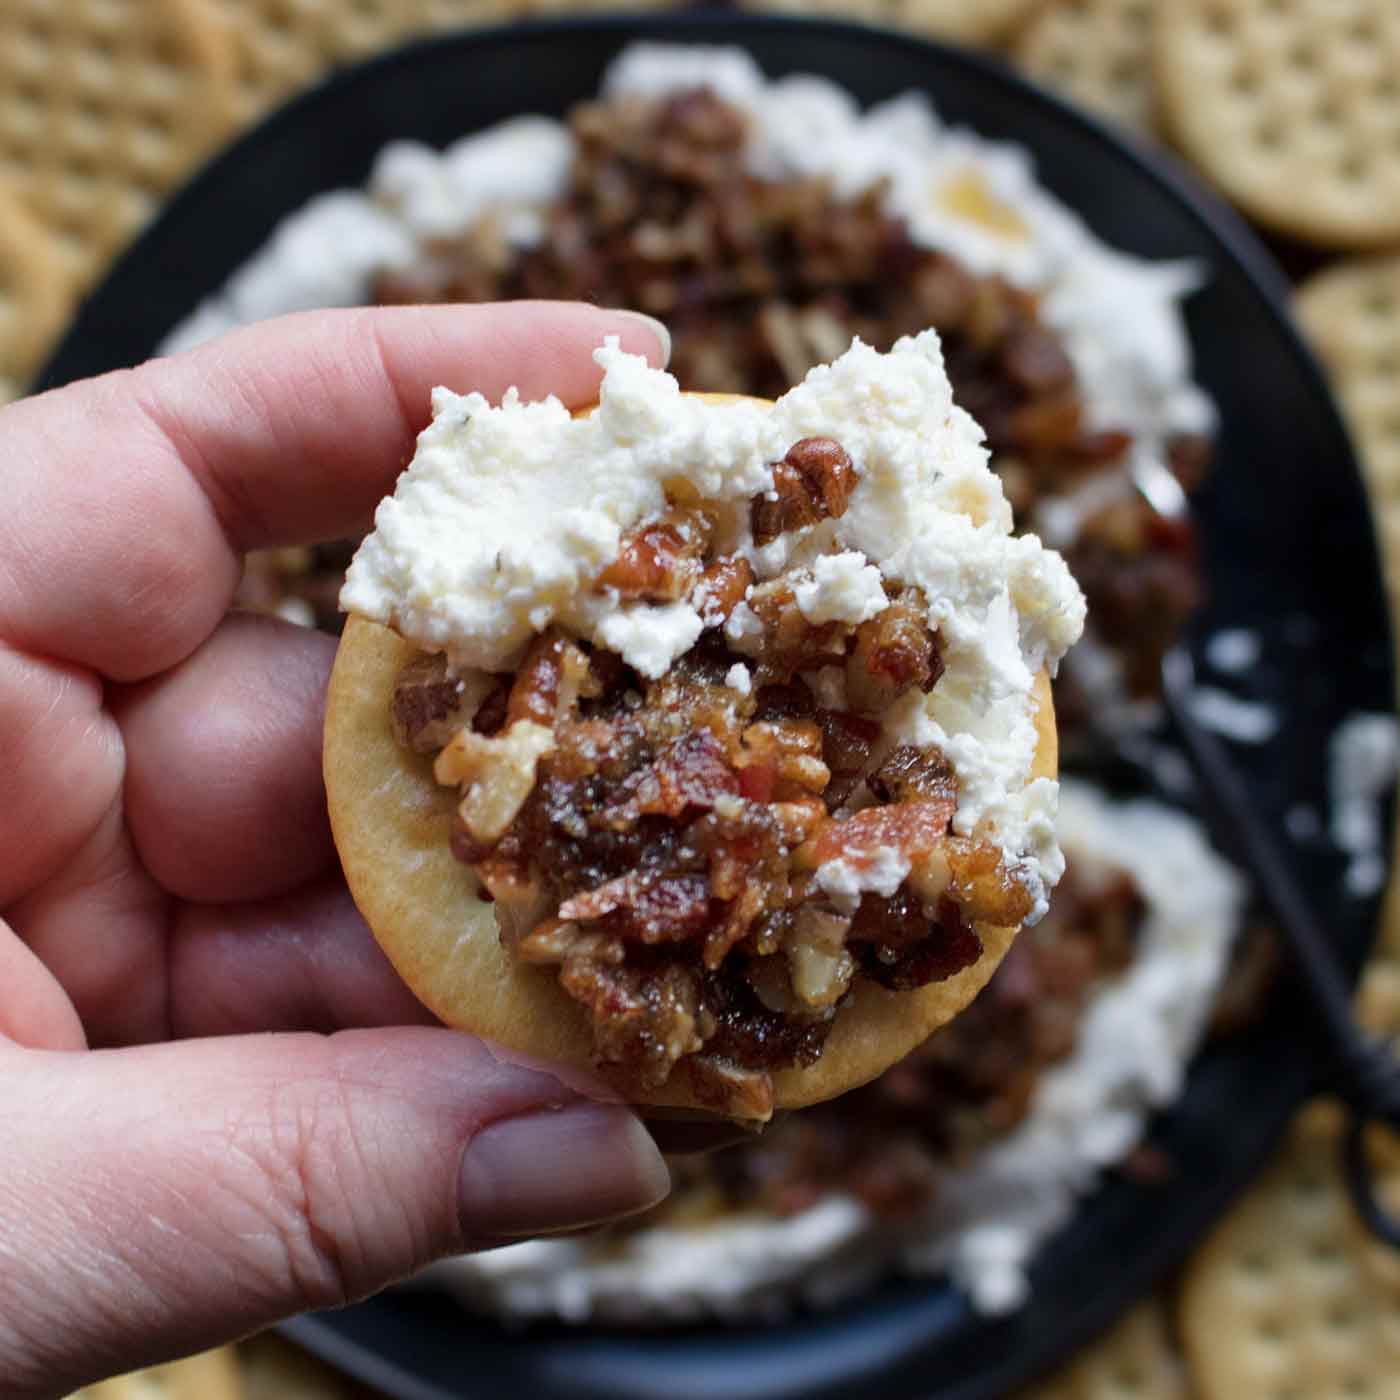 Close-up of Creamy Goat Cheese Bacon & Dates Dip spread on a cracker.